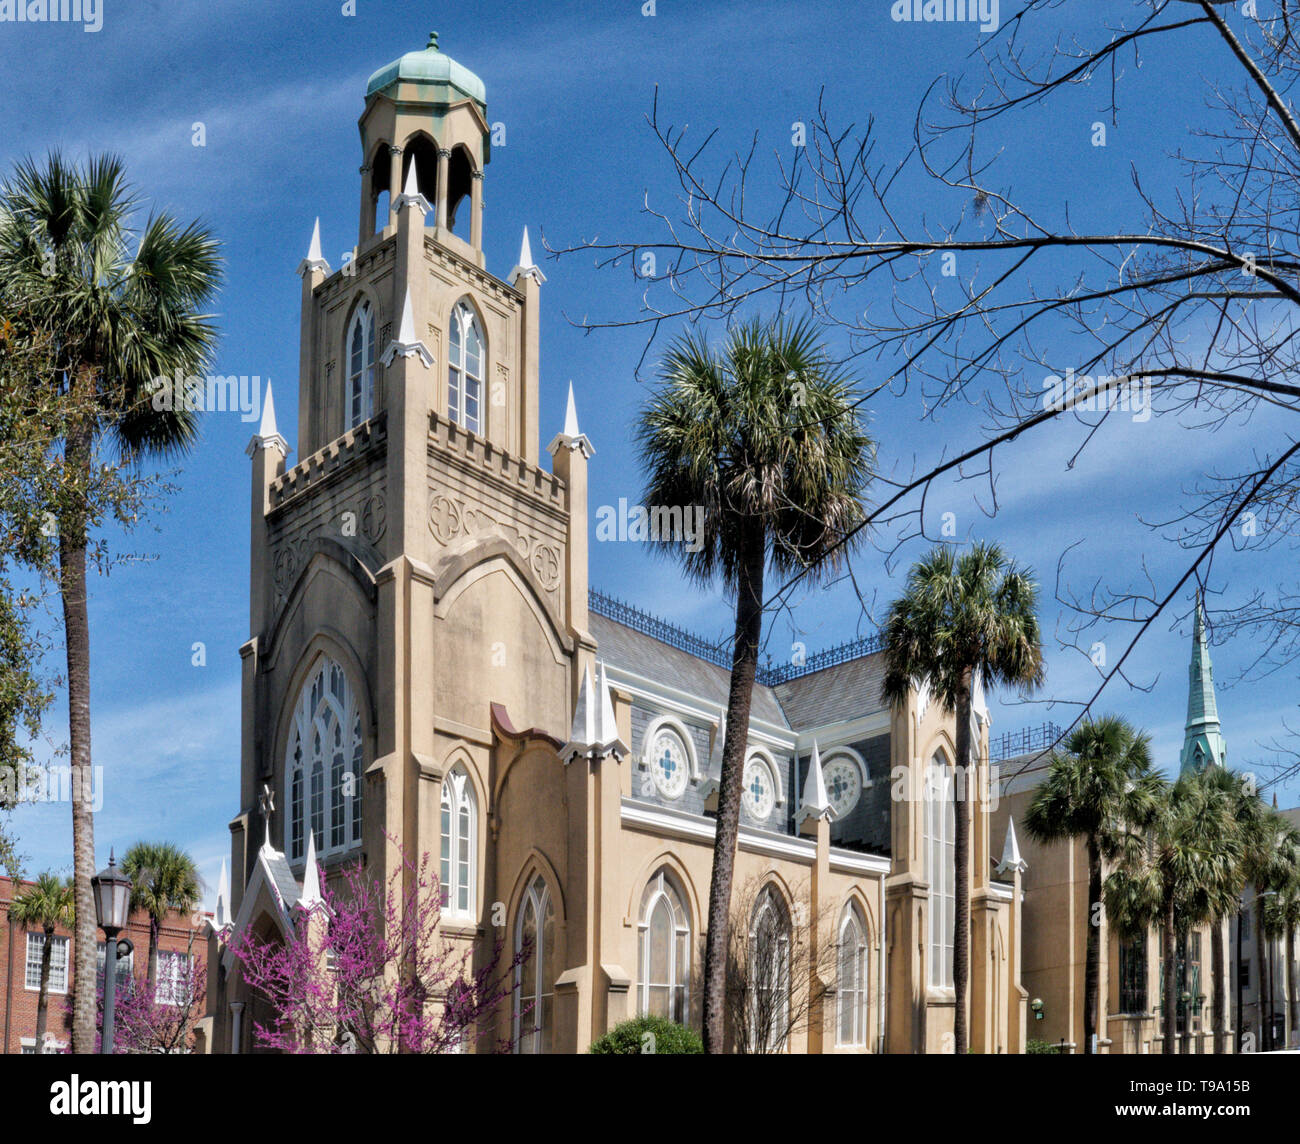 Congregation Mickve Israel, Kahal Kadosh Mickva, Savannah Georgia,one of the oldest synagogues in the United States. Founded originally in 1735. Stock Photo